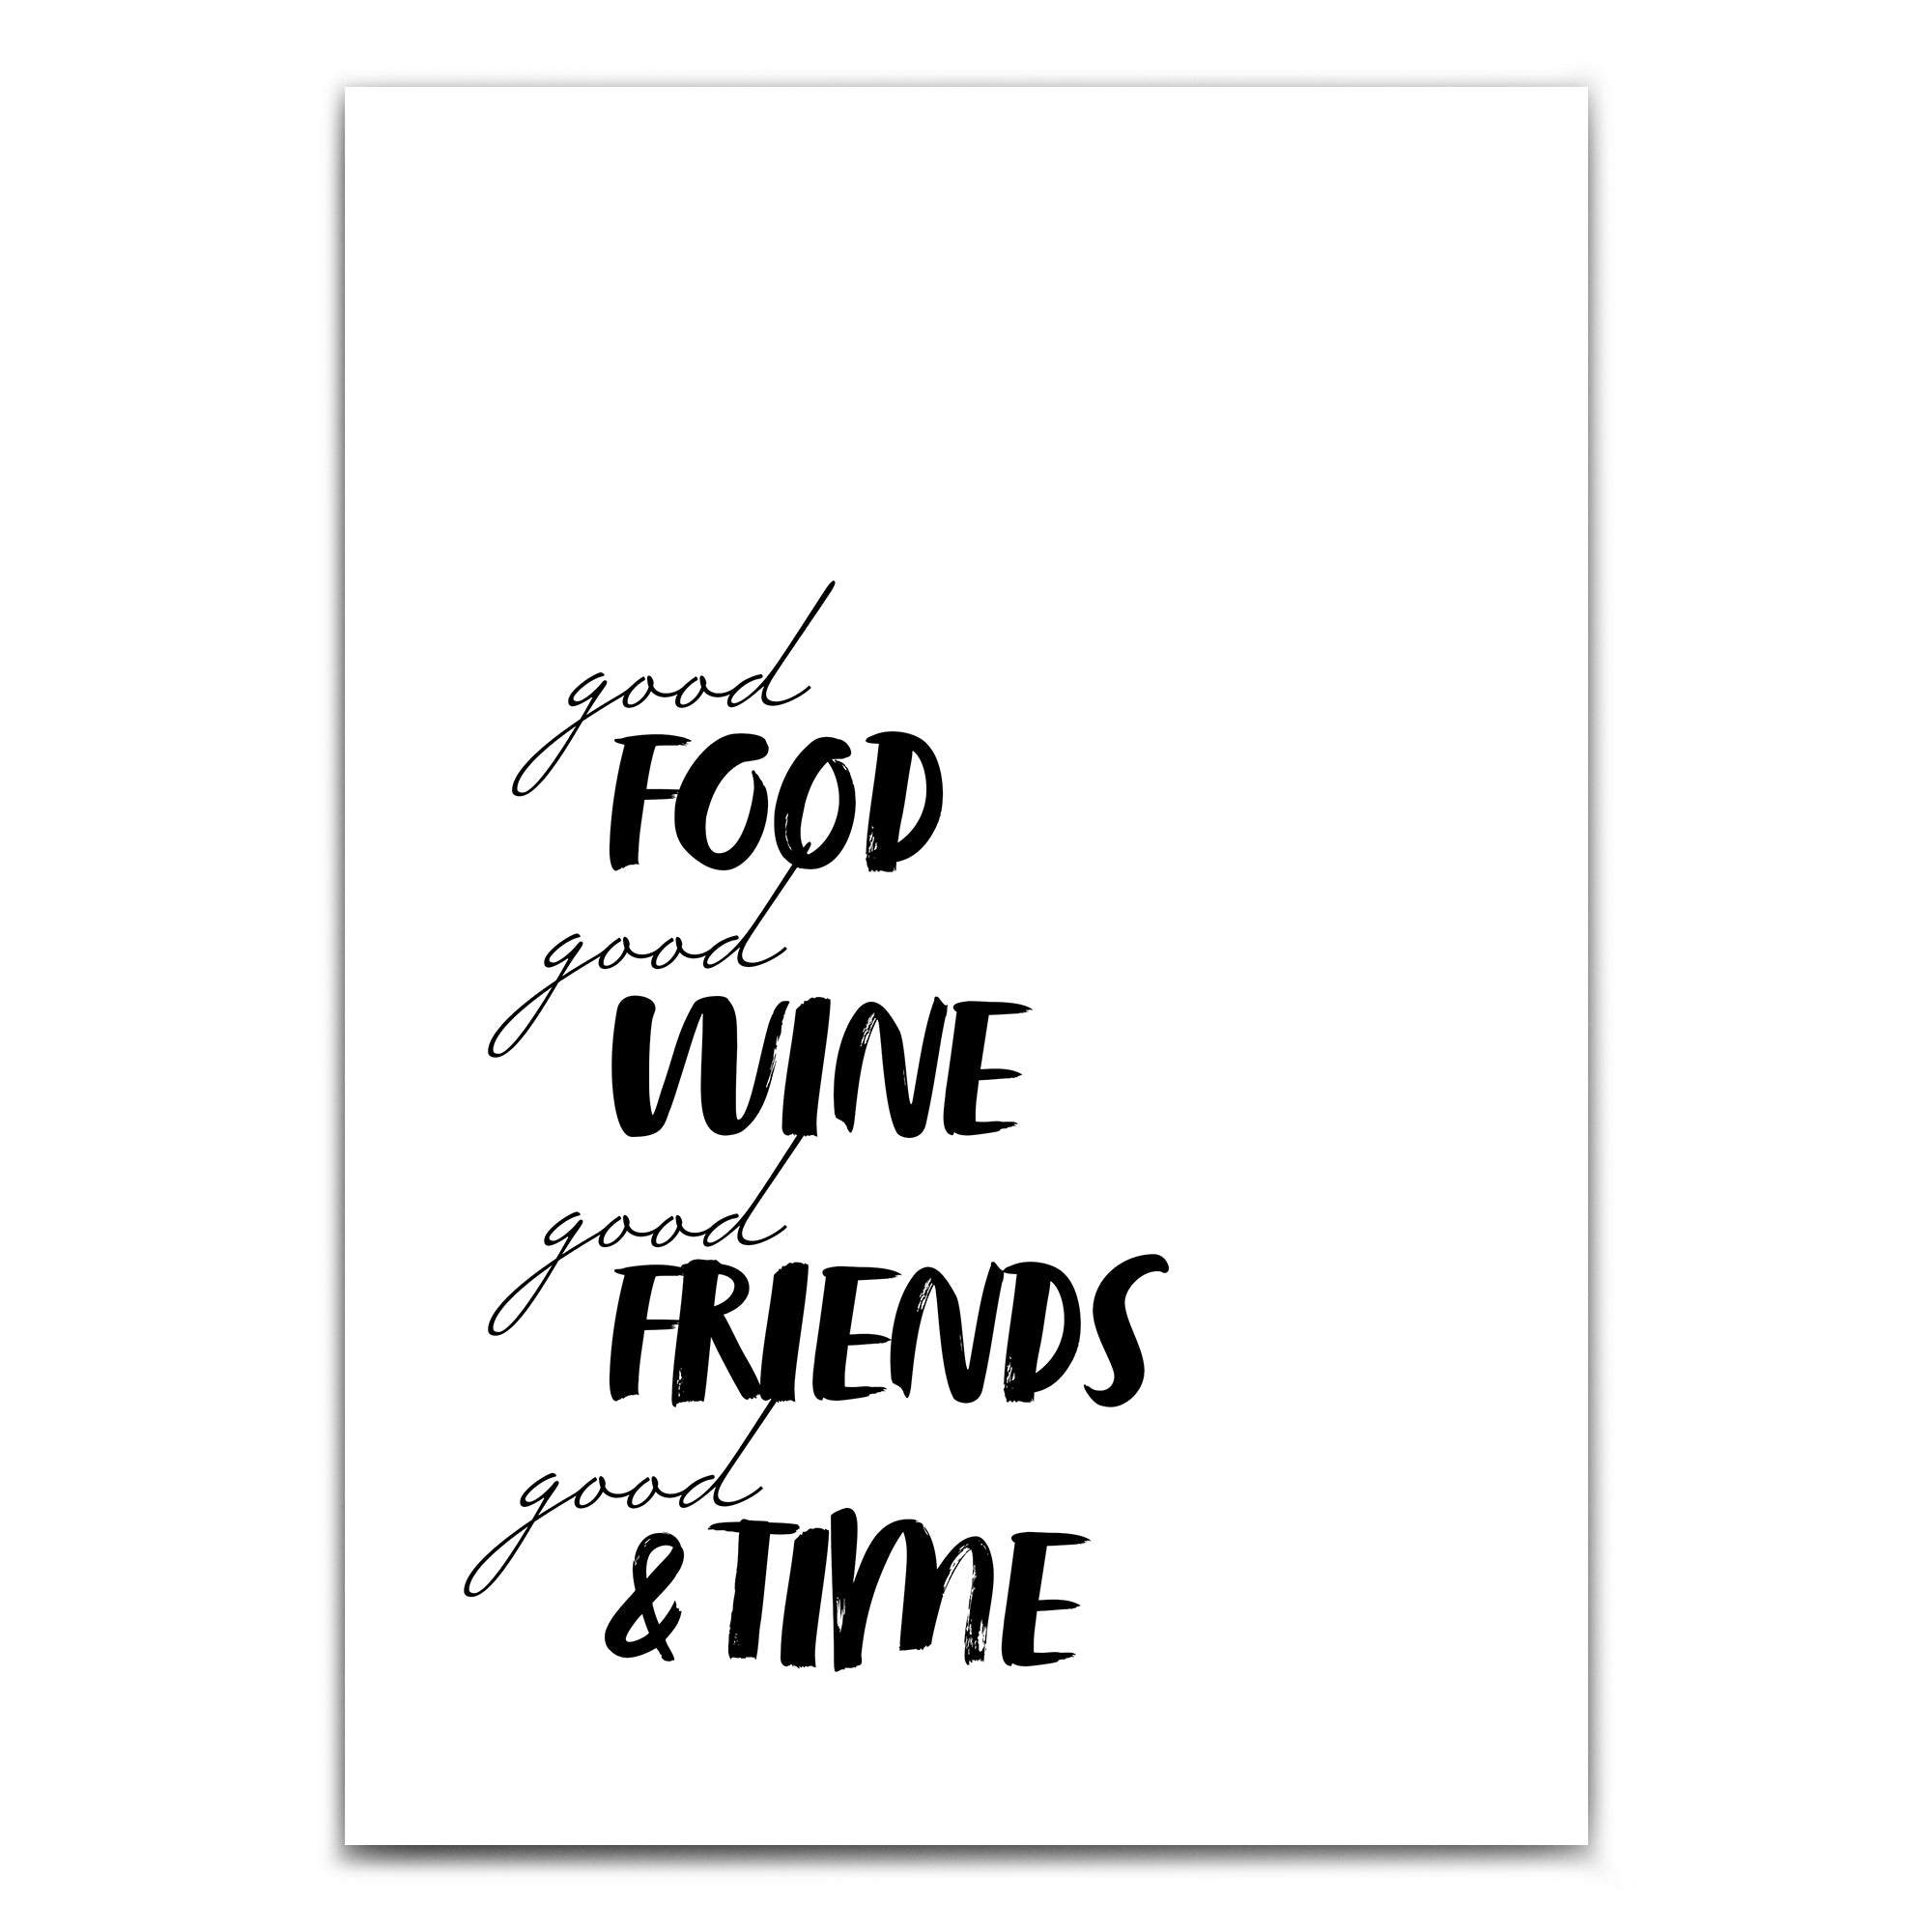 4one-pictures-kuchenposter-bild-kueche-spruch-quotes-good-food-wine-friends-a4_0076e59a-4535-480b-bba2-79c1c8b2ef3d.jpg